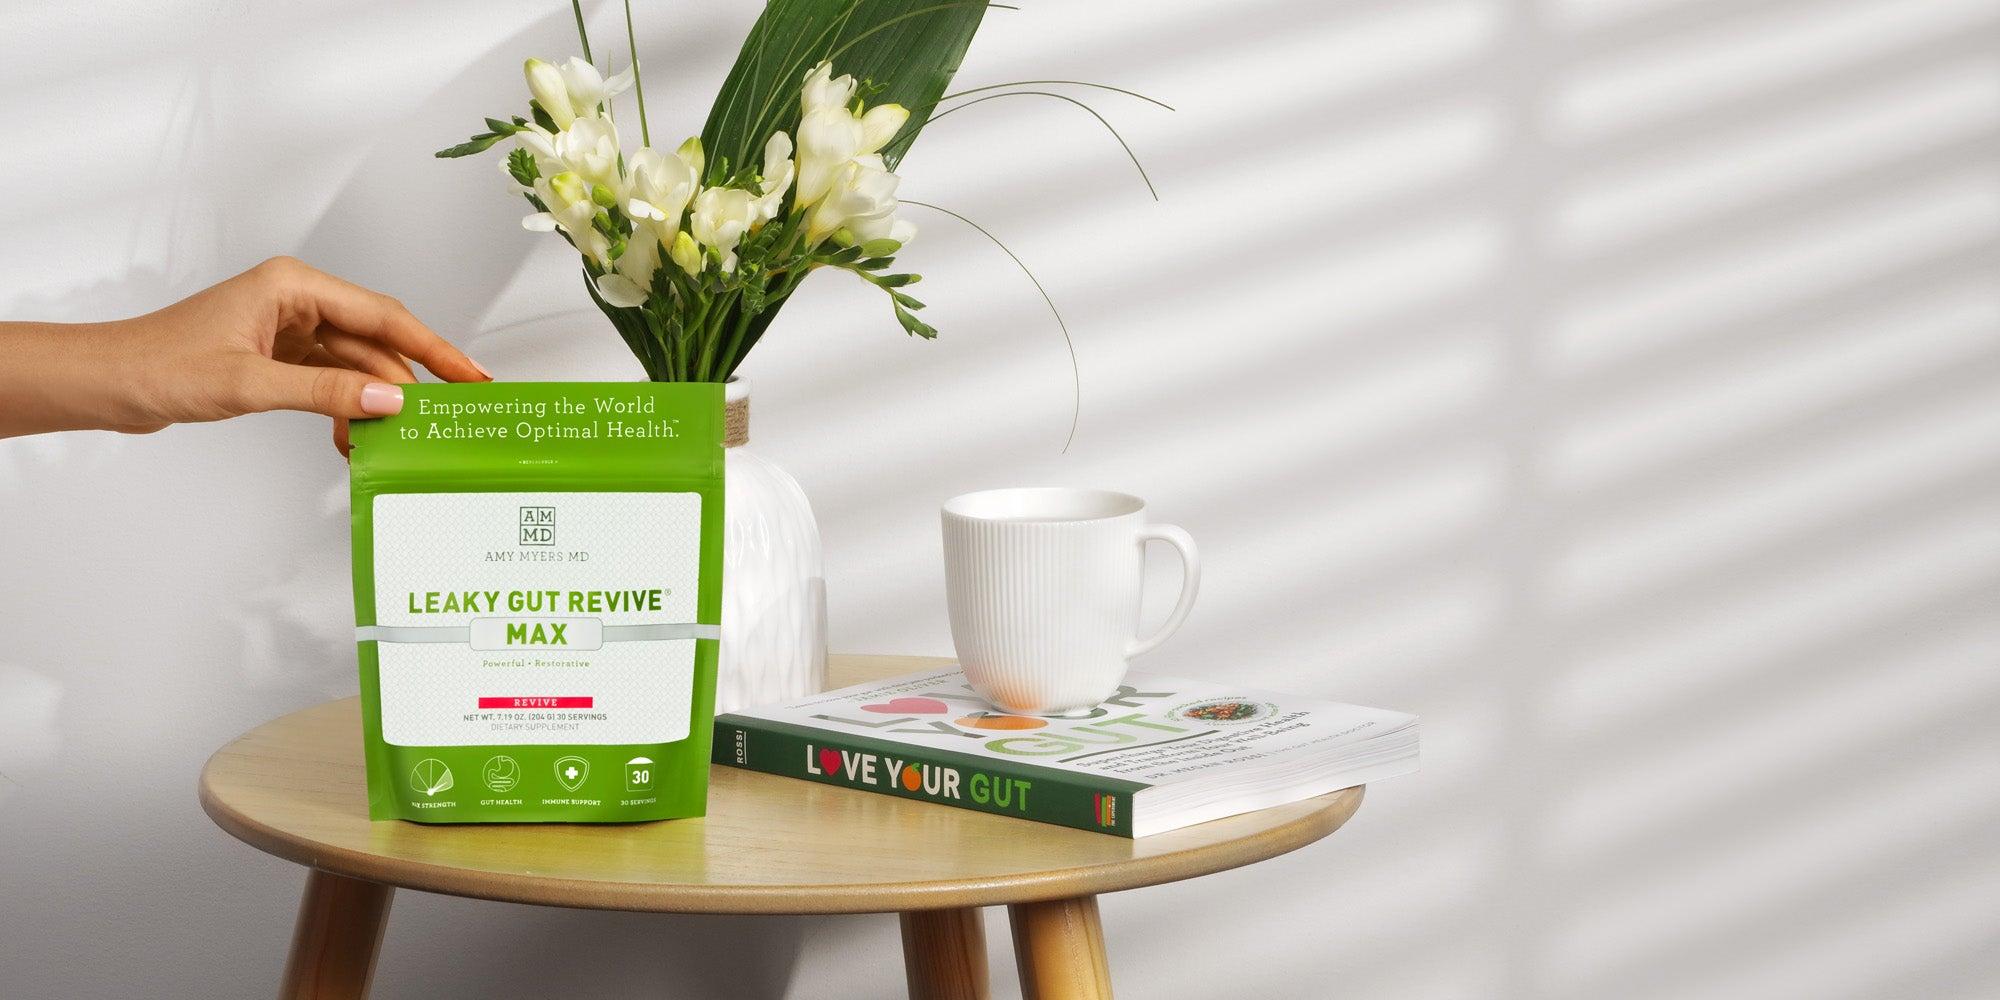 Leaky gut revive max product with a flower vase and mug.